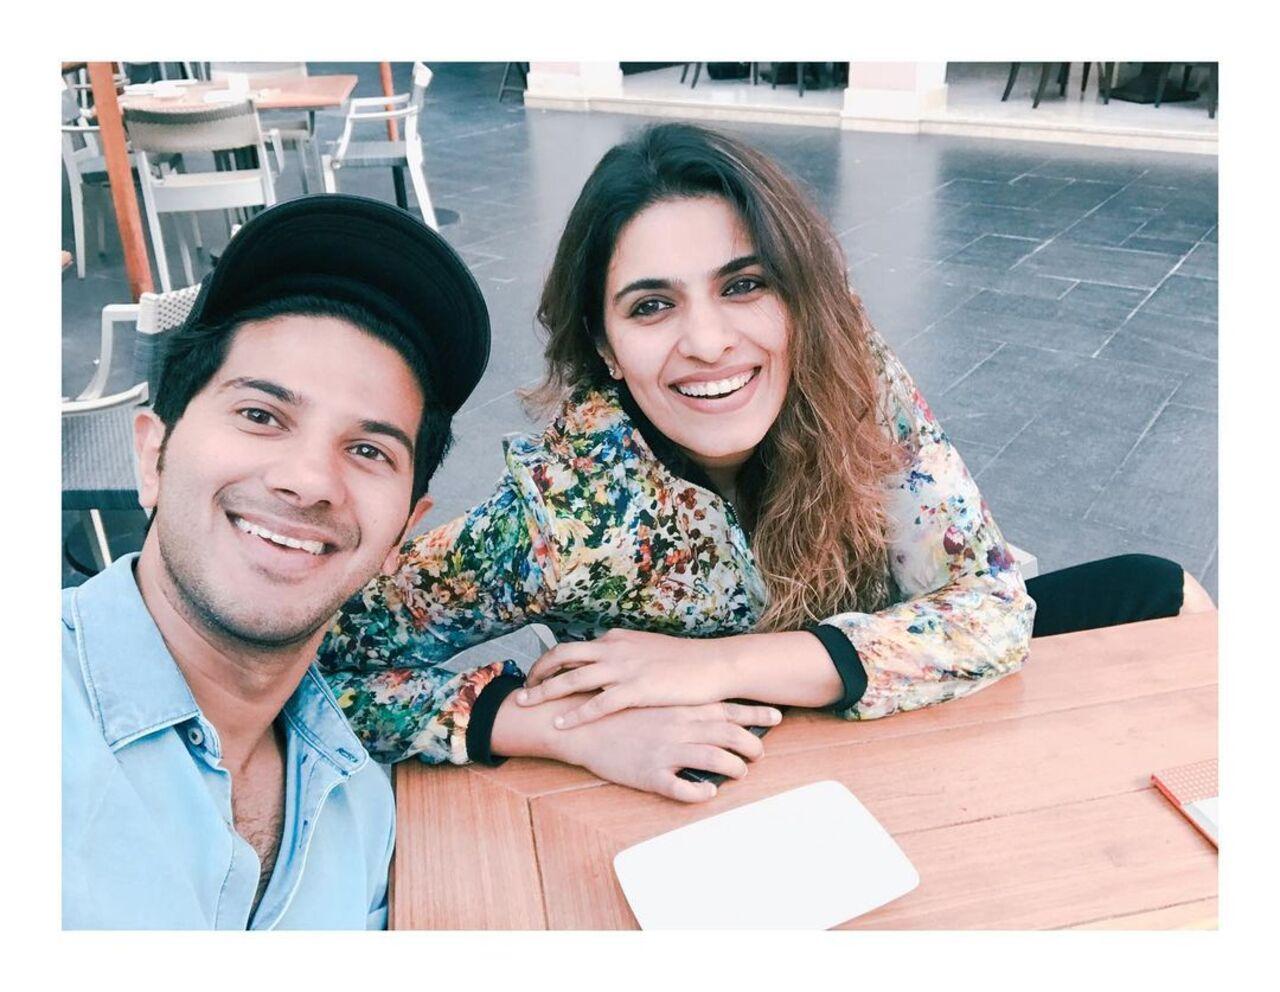 Mammootty's kids Dulquer Salmaan and Surumi pose together. The 'Bangalore Days' star often shares pictures with his elder sister on his Instagram